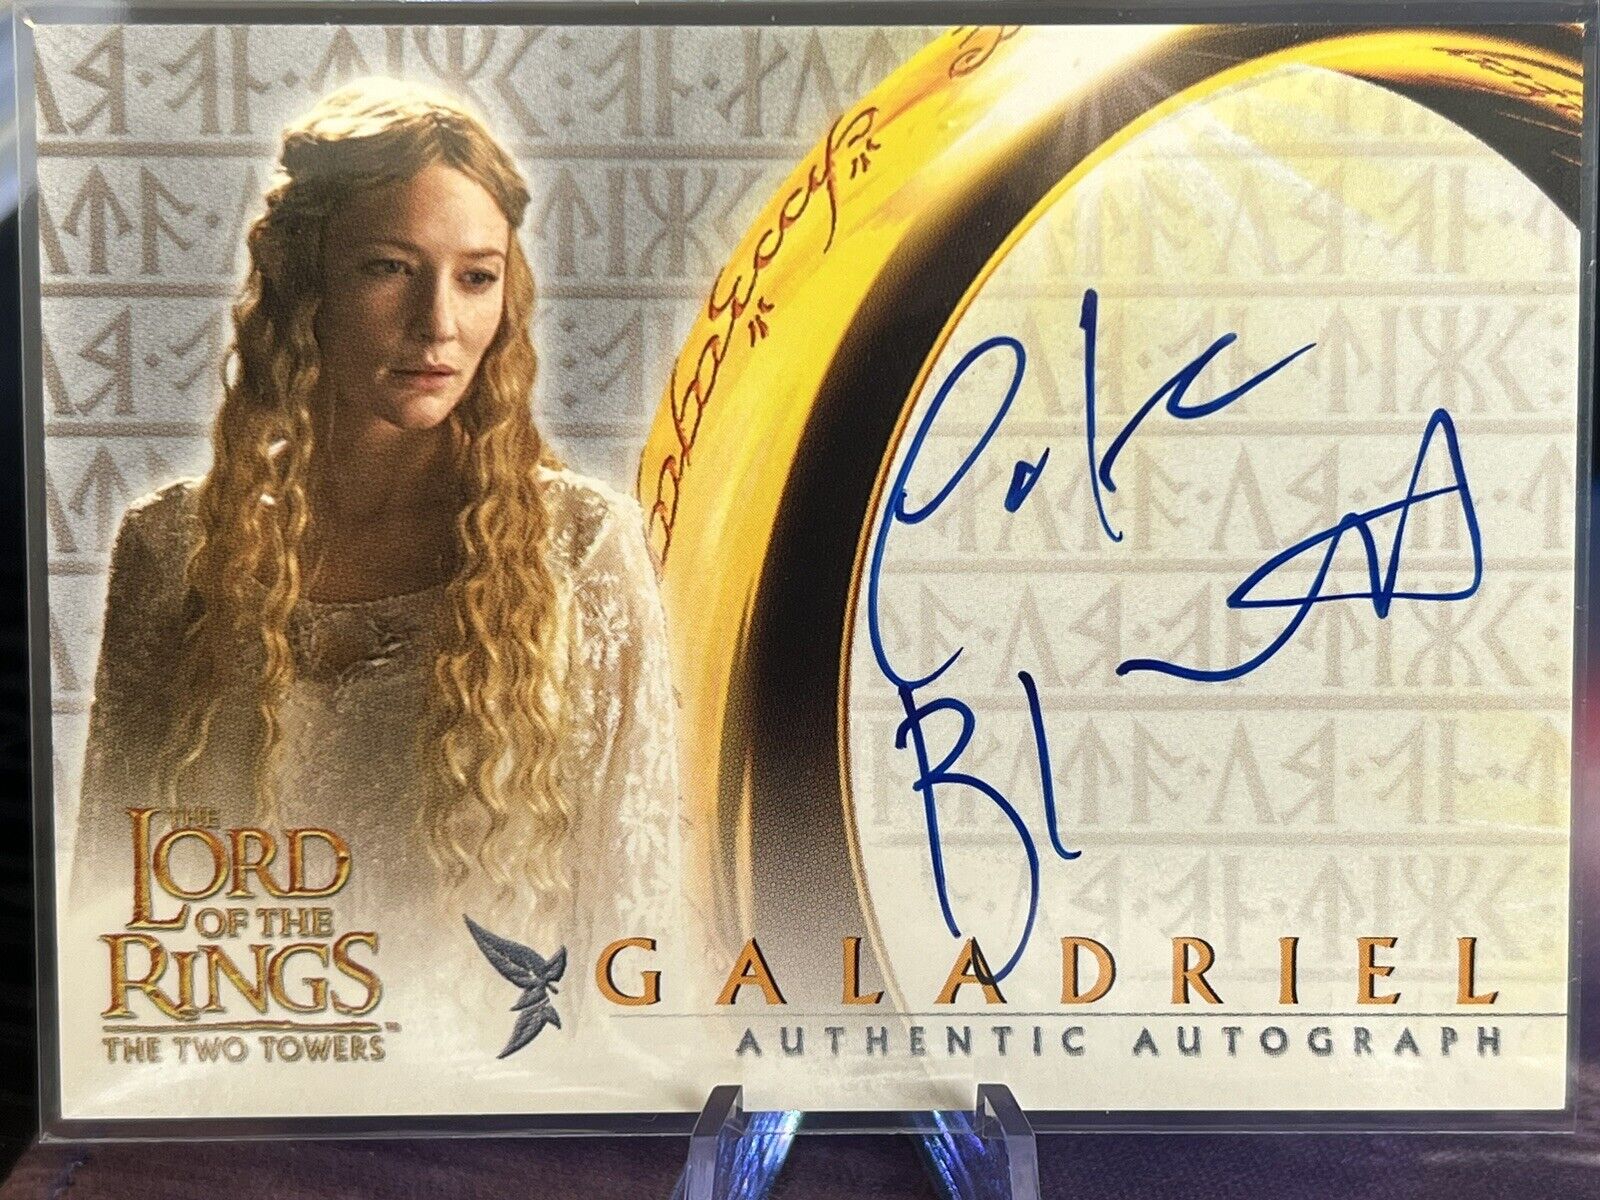 Lord of The Rings TWO TOWERS LOTR Cate Blanchett Galadriel Autograph Auto Card